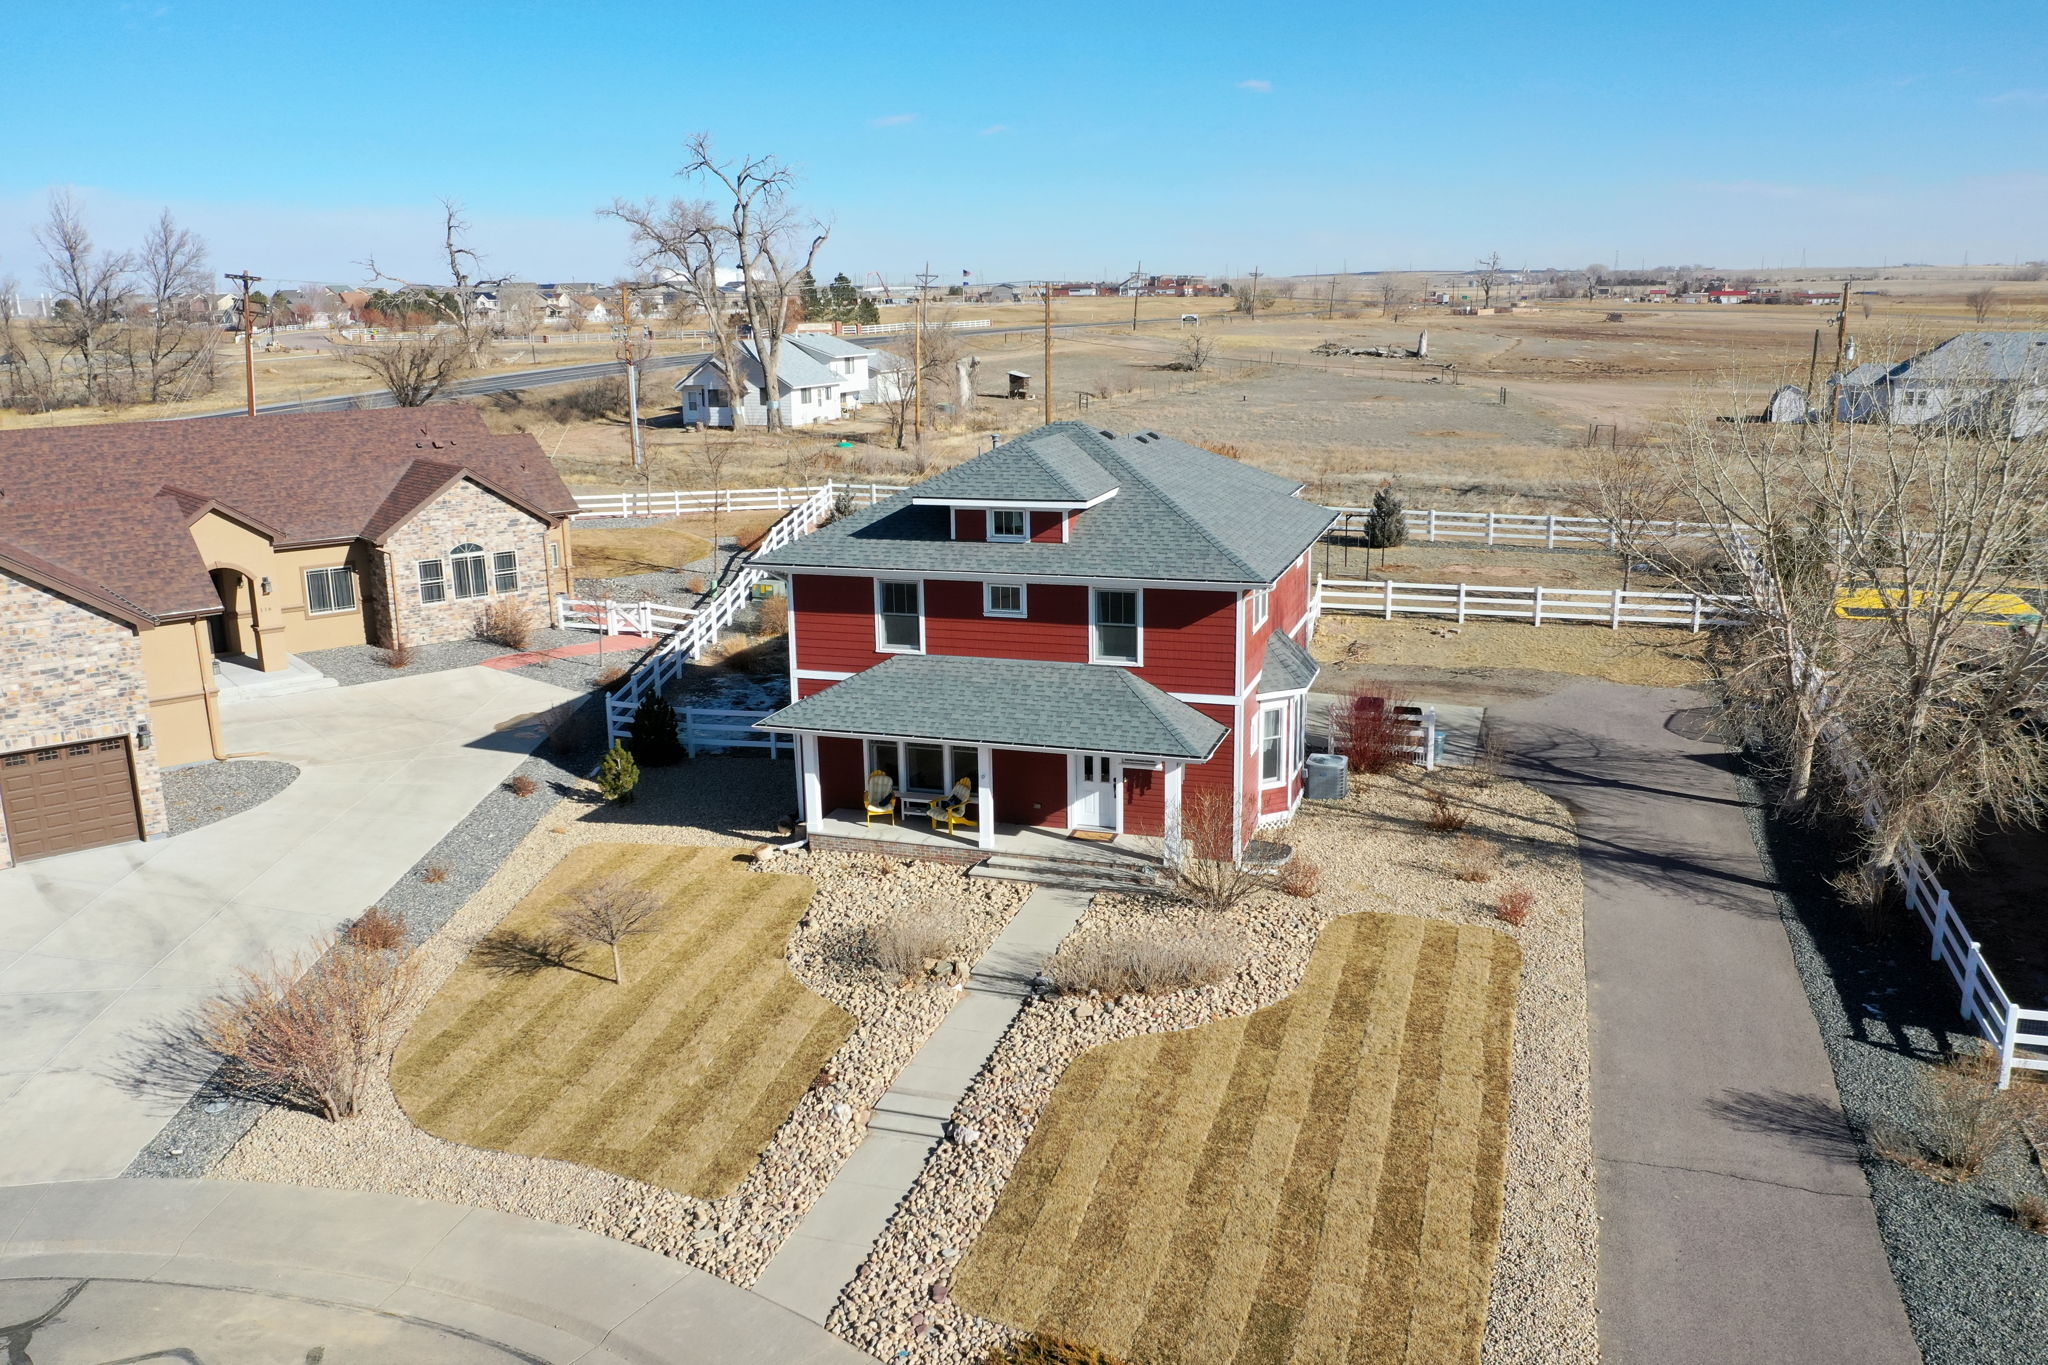  126 S Trail Blazer Rd, Fort Lupton, CO 80621, US